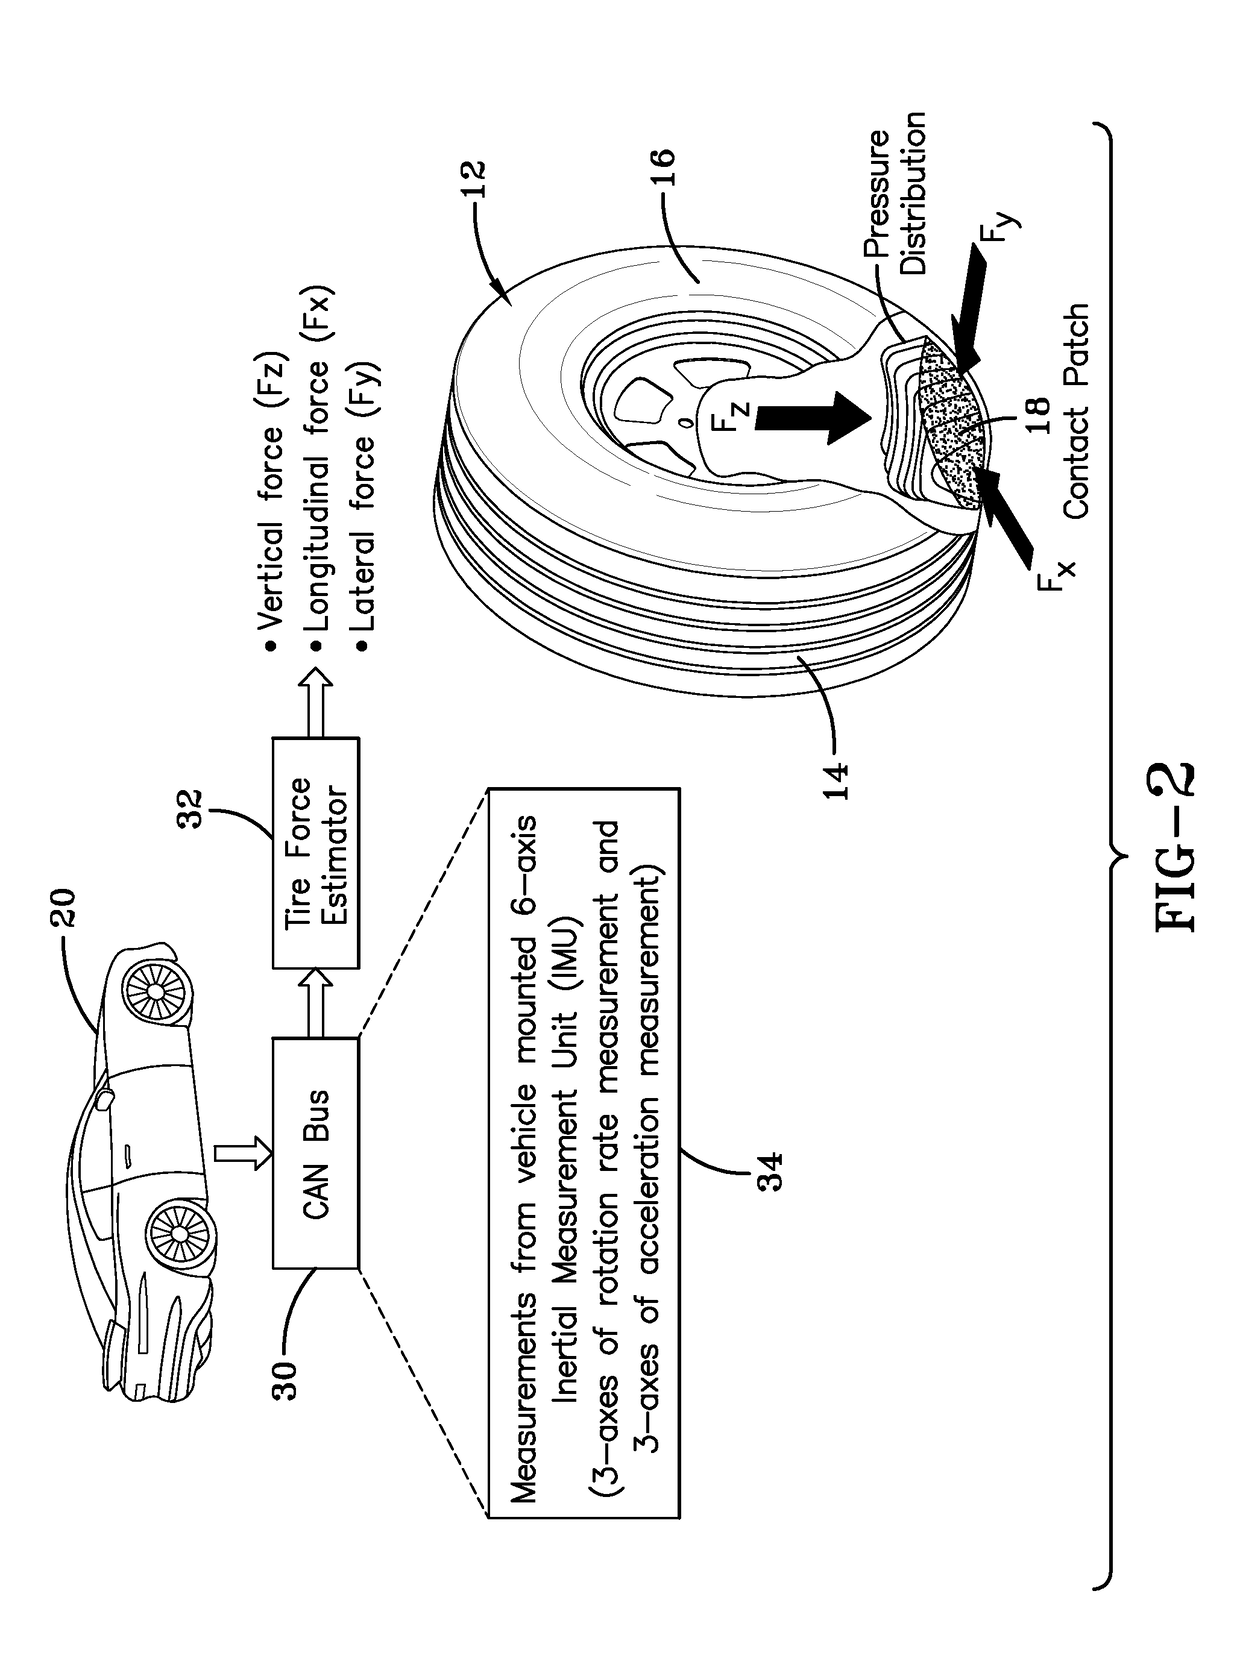 Indirect tire wear state prediction system and method